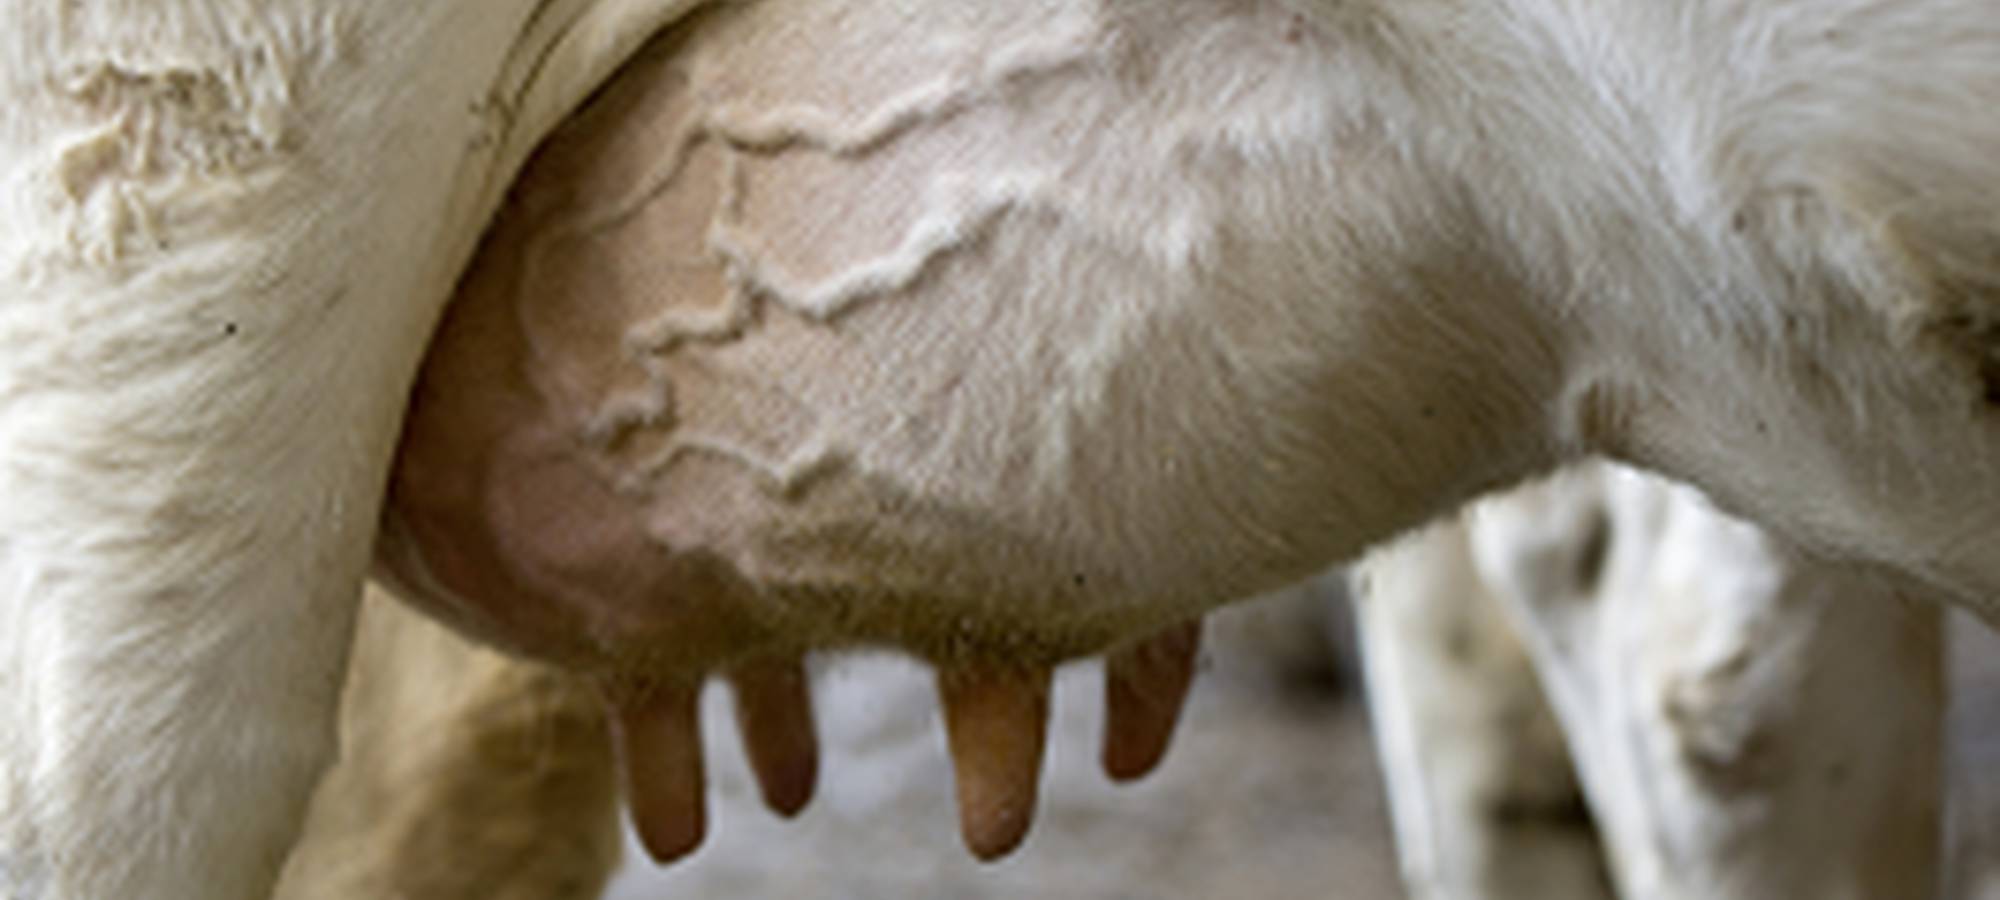 When you are looking at a dairy cow's teats they should be?